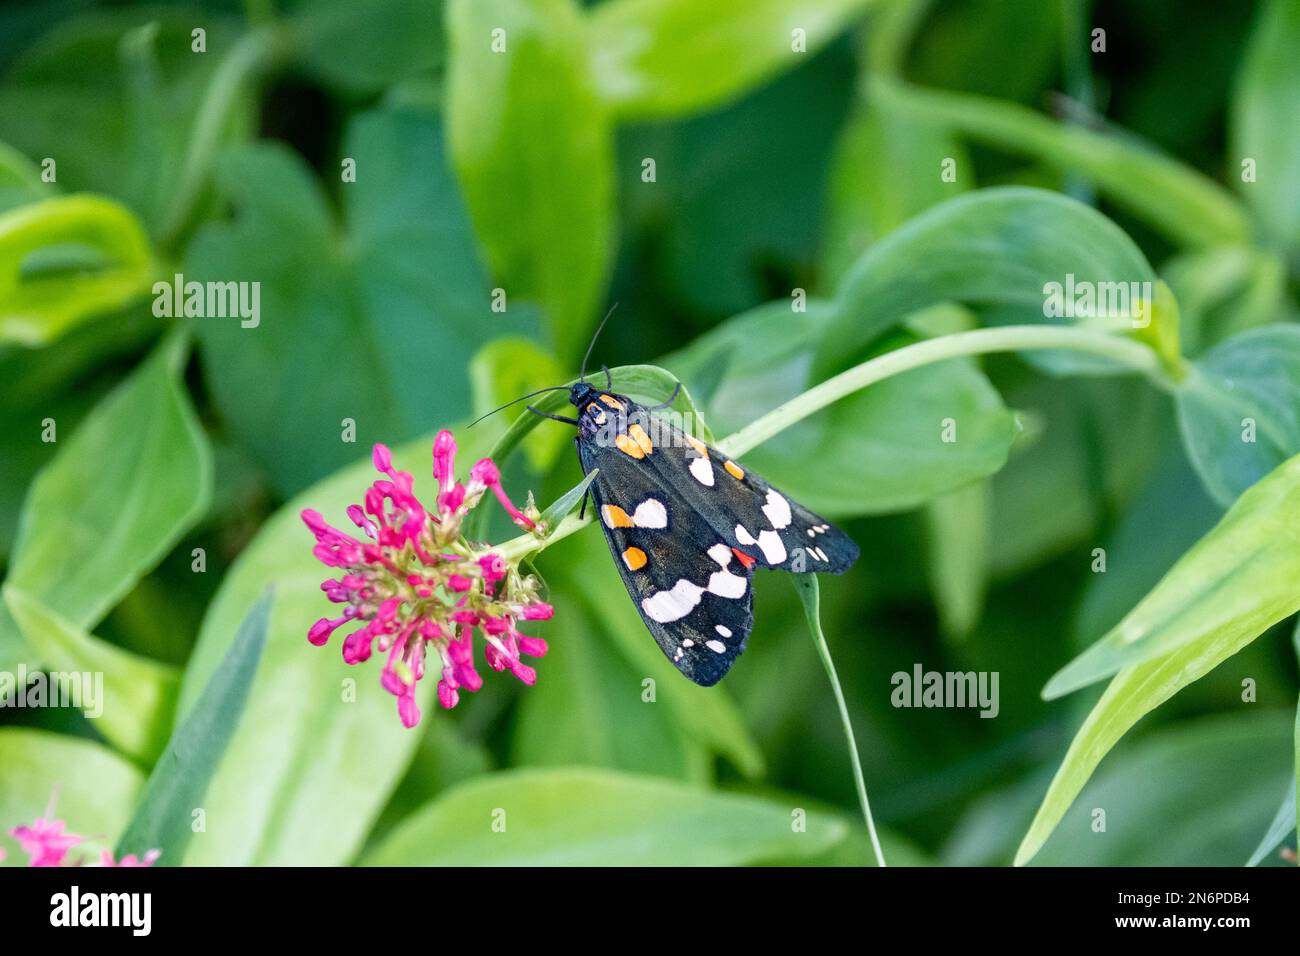 A scarlet tiger moth, Callimorpha dominula, with its wings closed hiding the red hind wings perched on the stem of a Red valerian flower, Centranthus Stock Photo